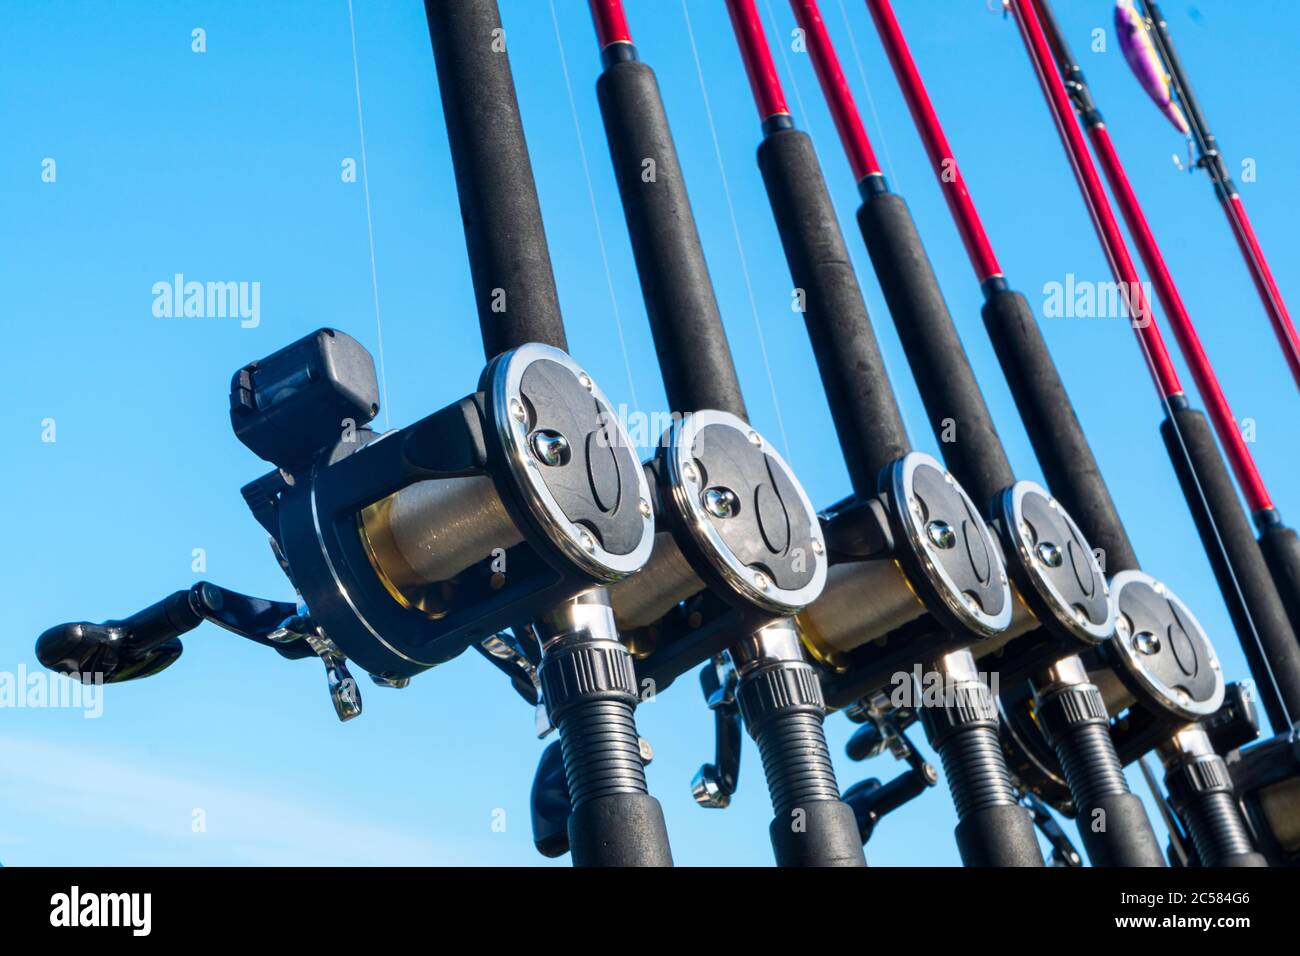 Fishing trolling boat rods in rod holder. Big game fishing. Fishing reels  and rods pattern on boat. Sea fishing rods and reels in a row Stock Photo -  Alamy